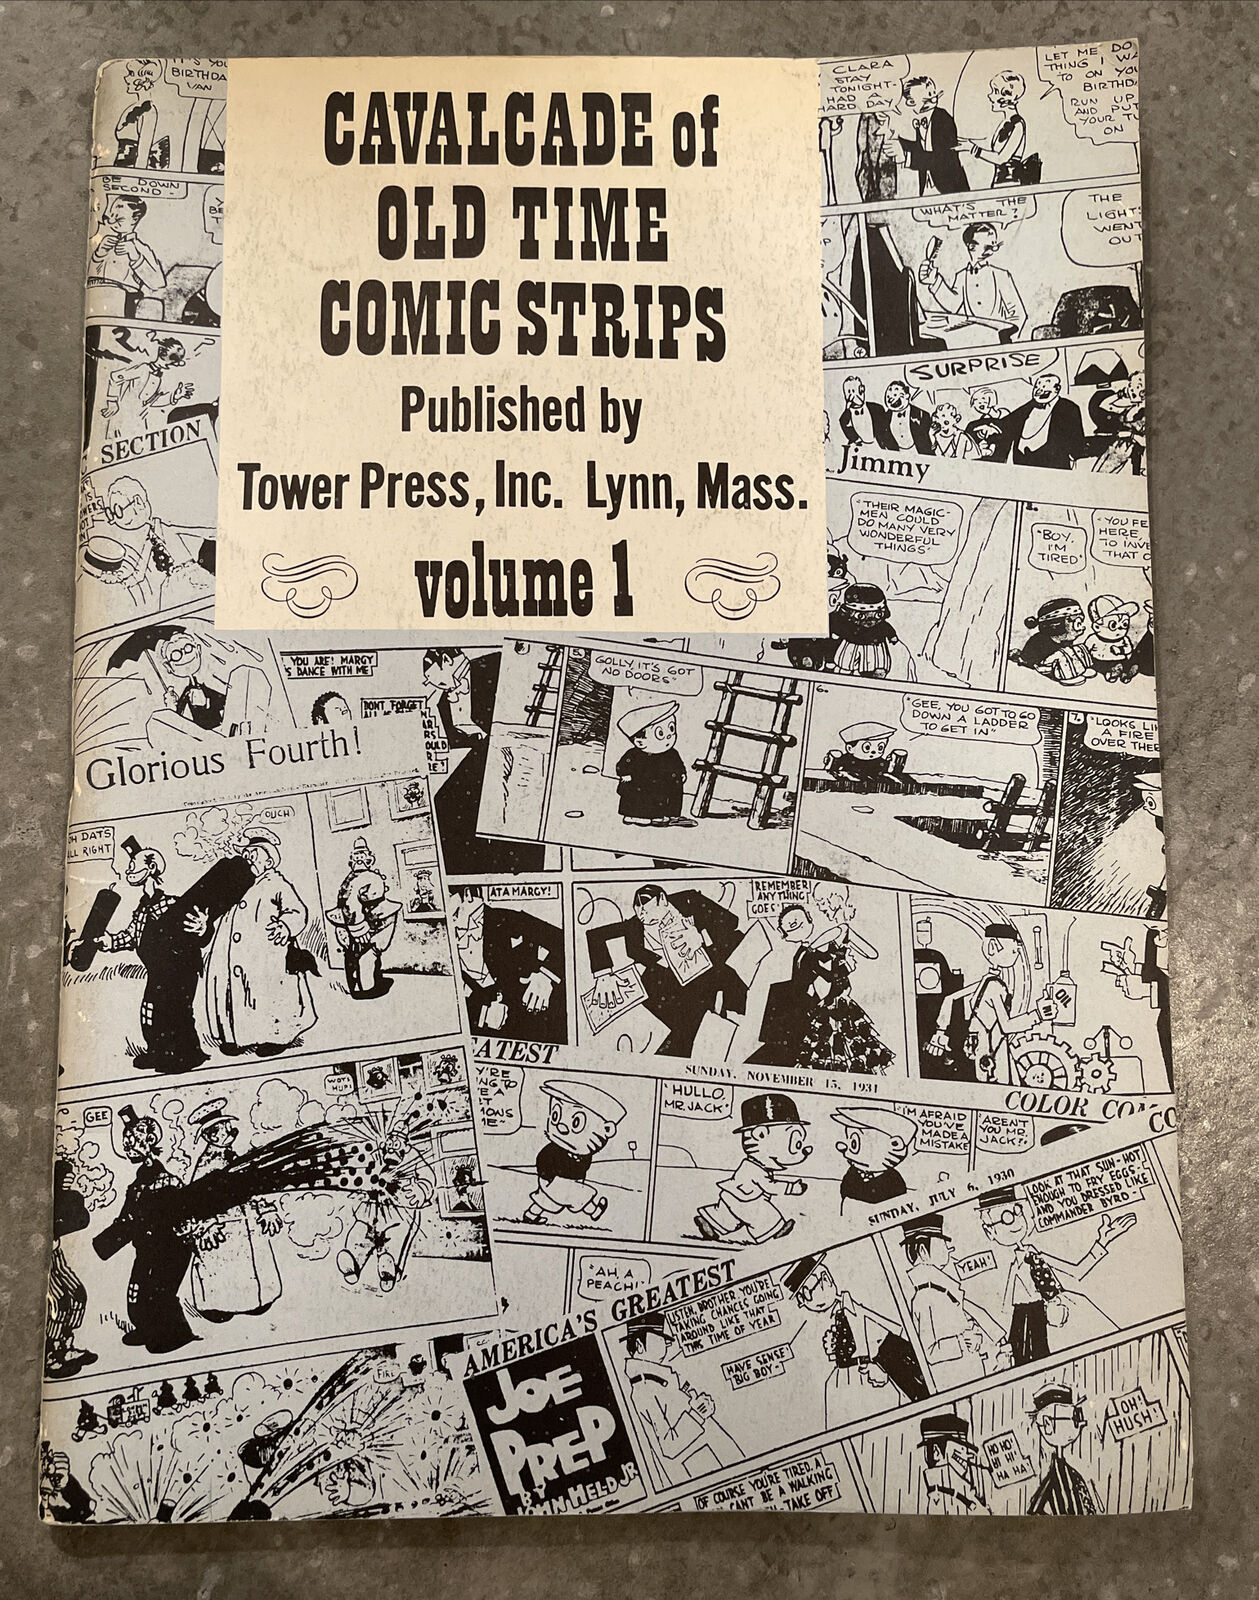 Vol #1 Cavalcade of Old Time Comic Strips Tower Press Early Illustrations ++